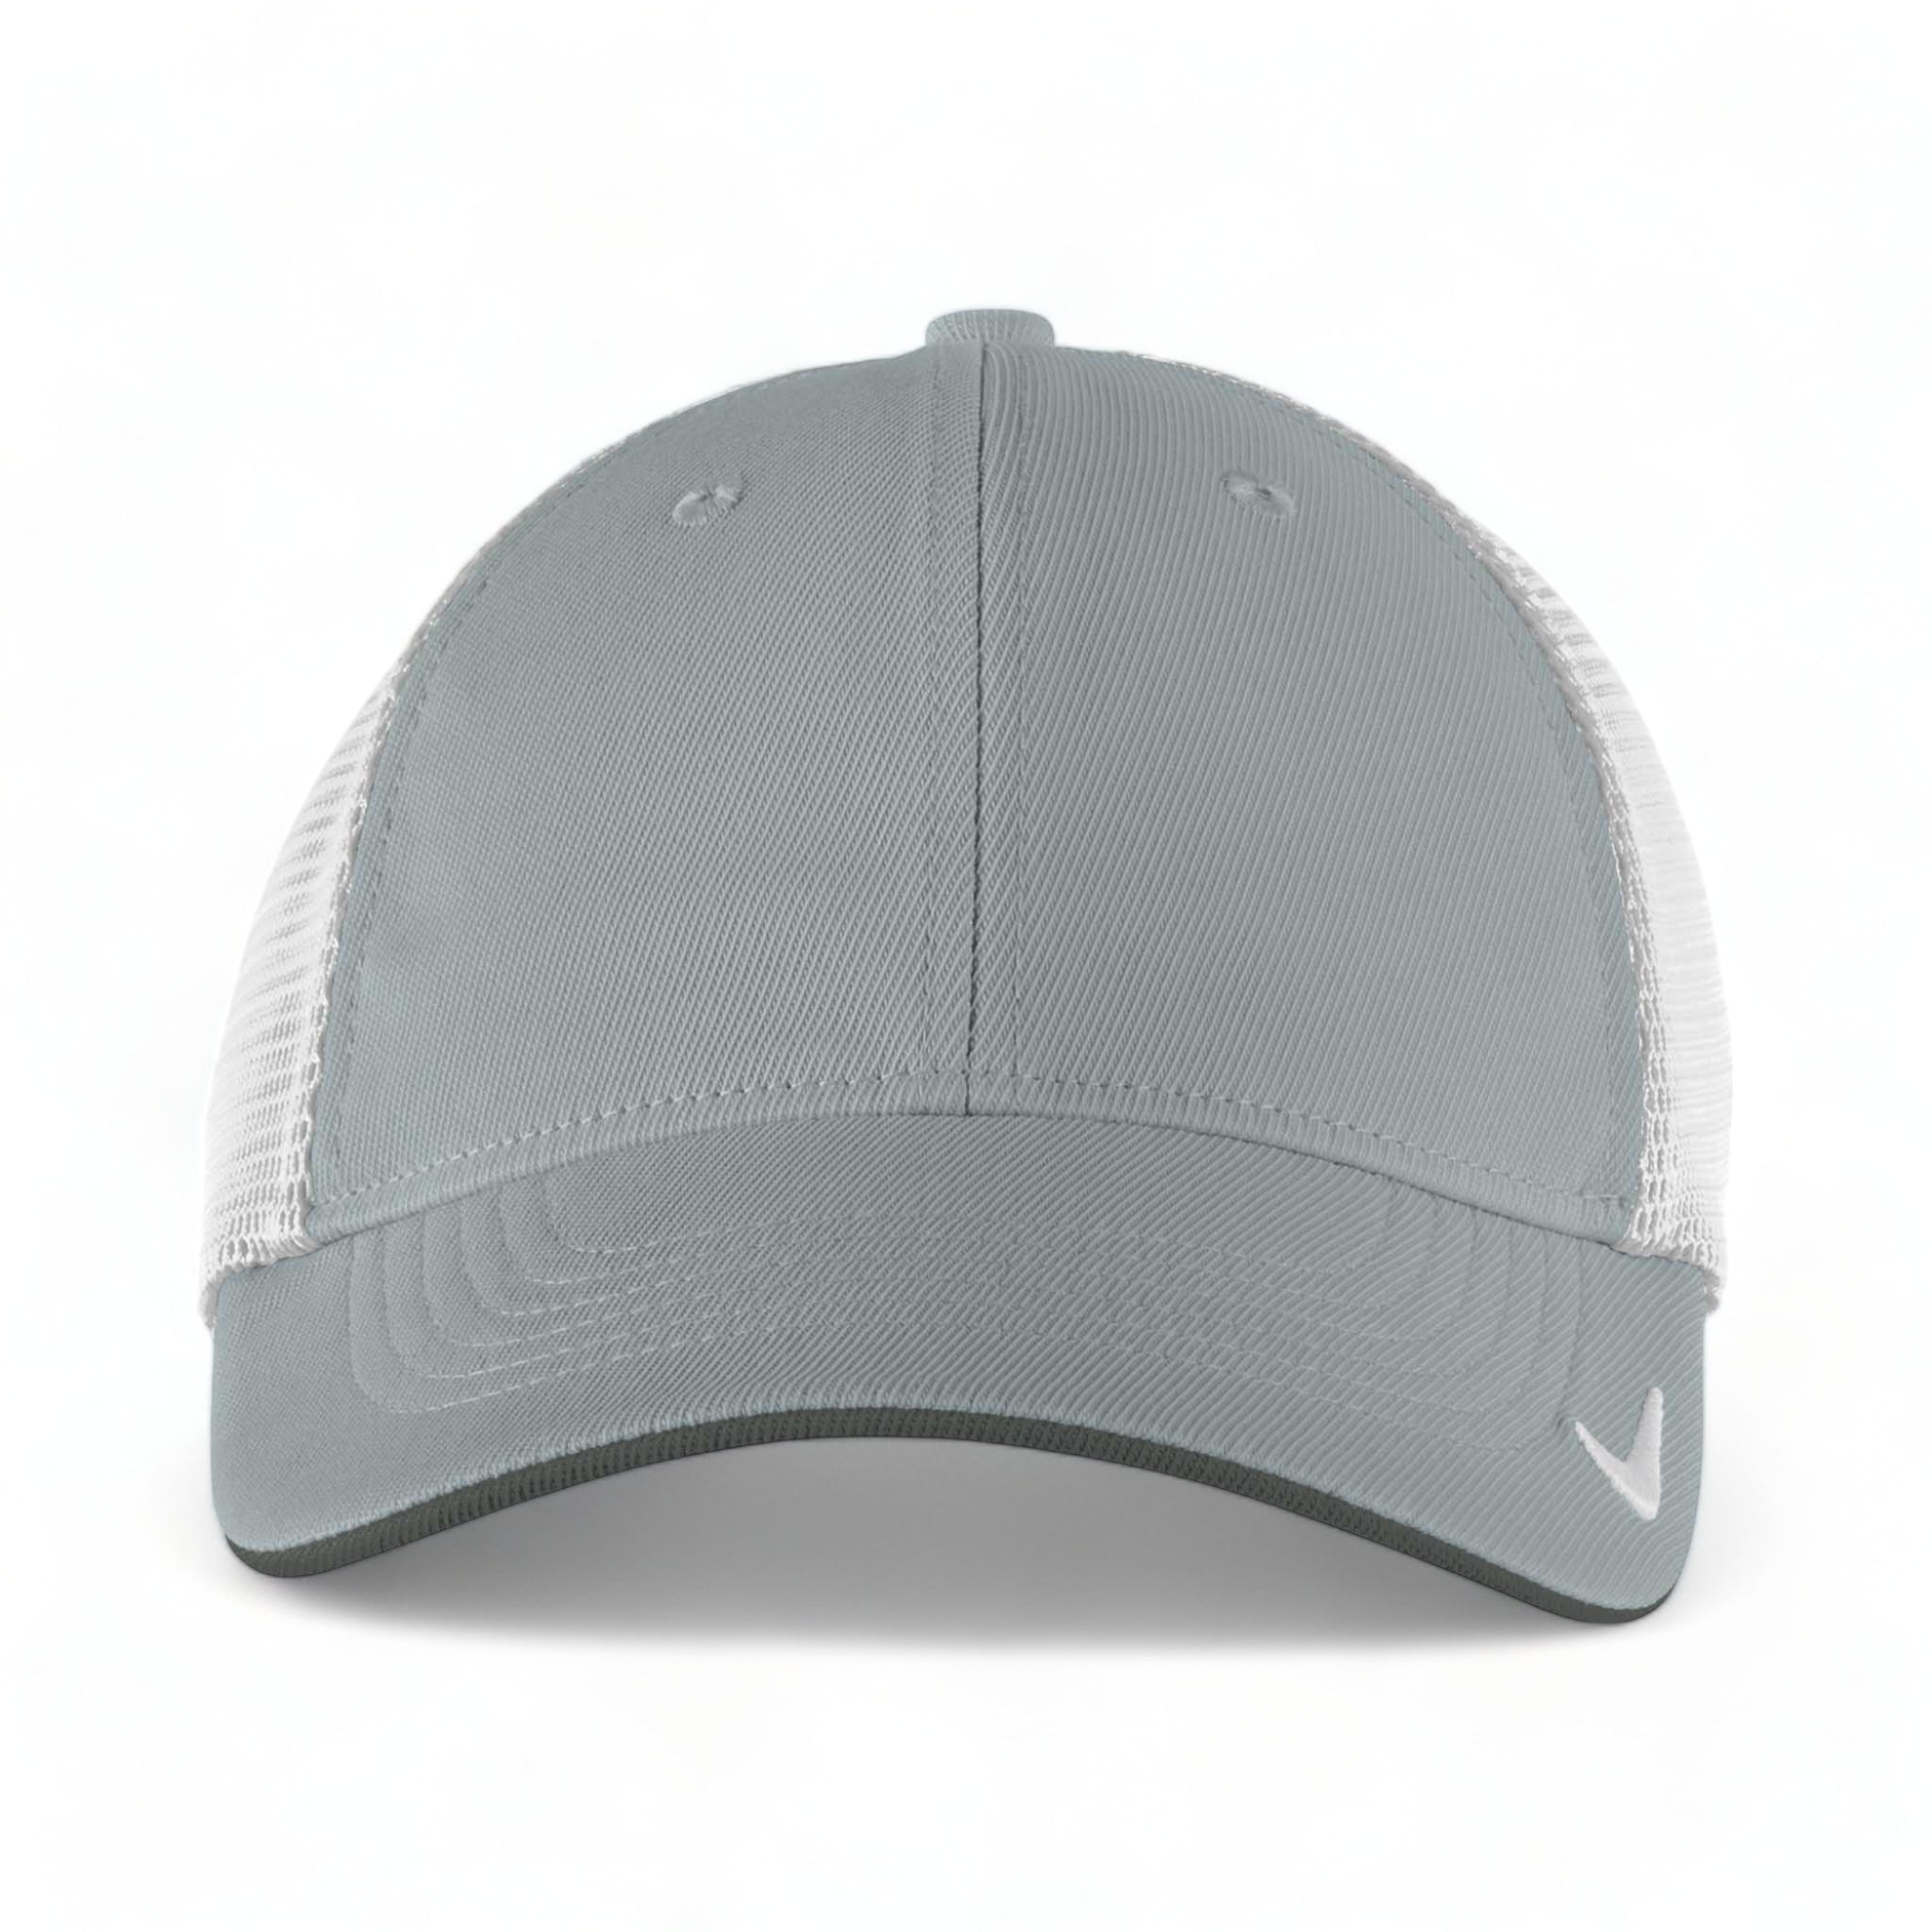 Front view of Nike NKFB6448 custom hat in cool grey and white